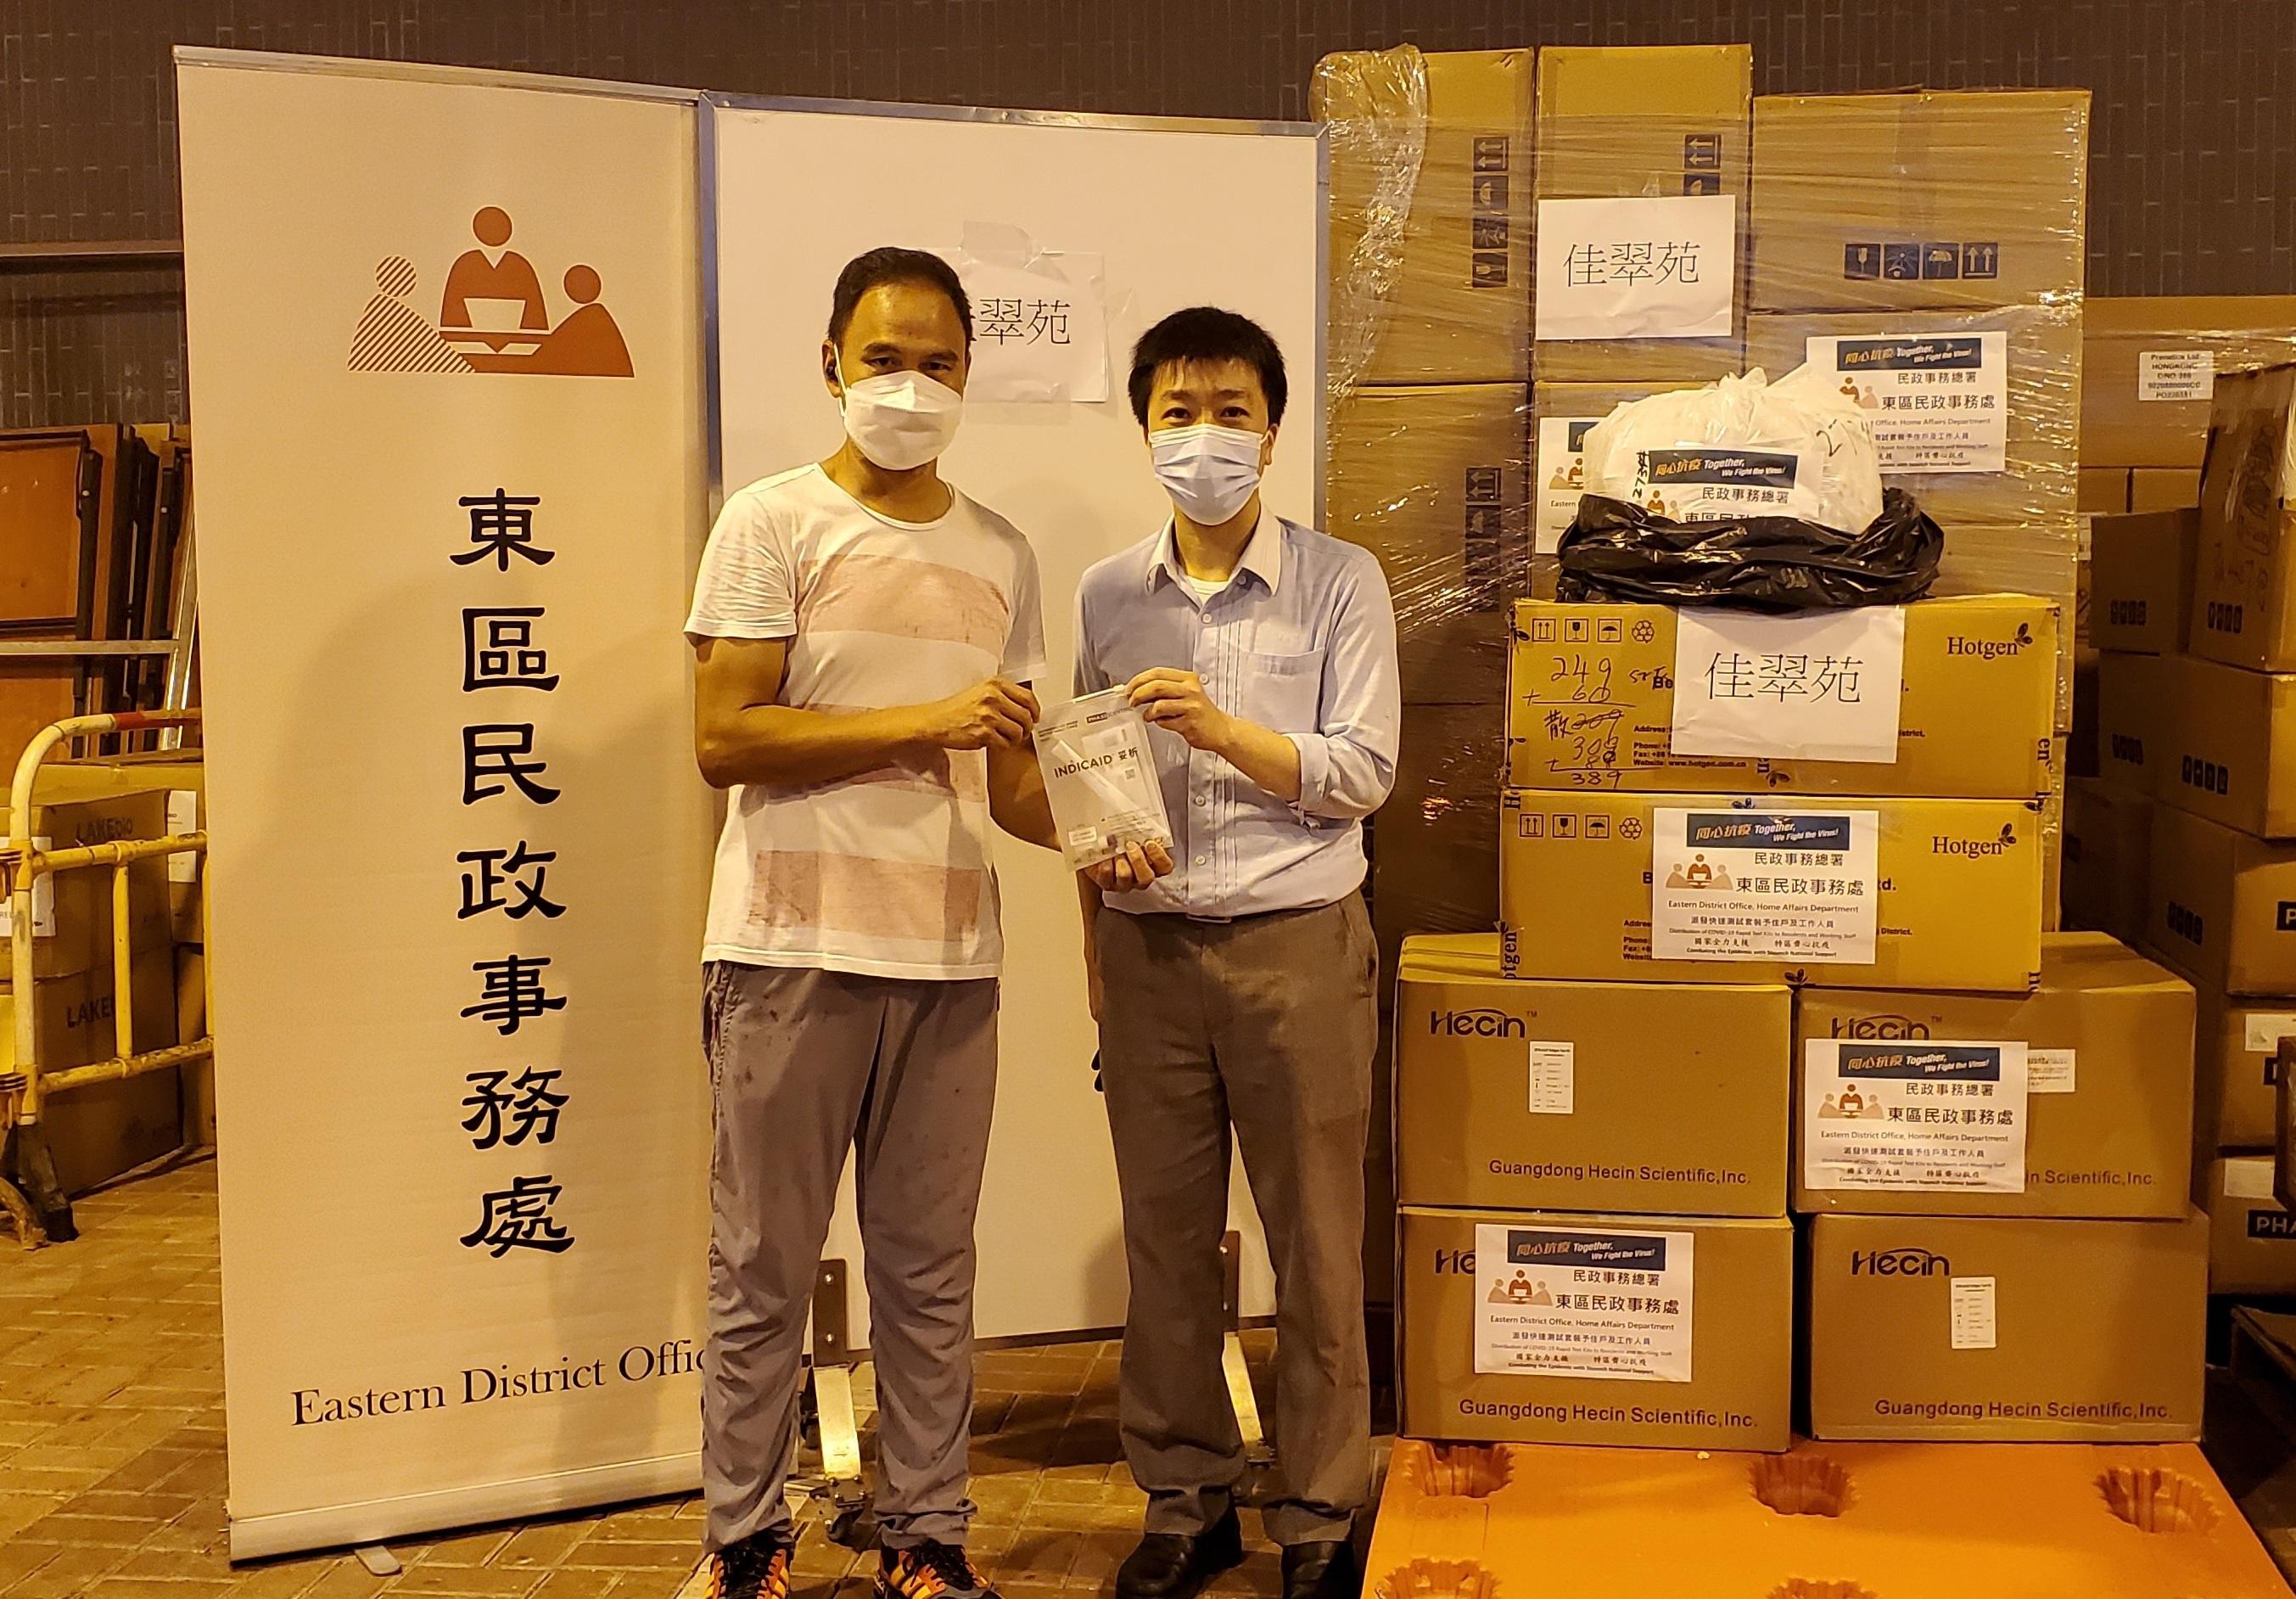 The Eastern District Office today (June 9) distributed COVID-19 rapid test kits to households, cleansing workers and property management staff living and working in Kai Tsui Court for voluntary testing through the property management company.